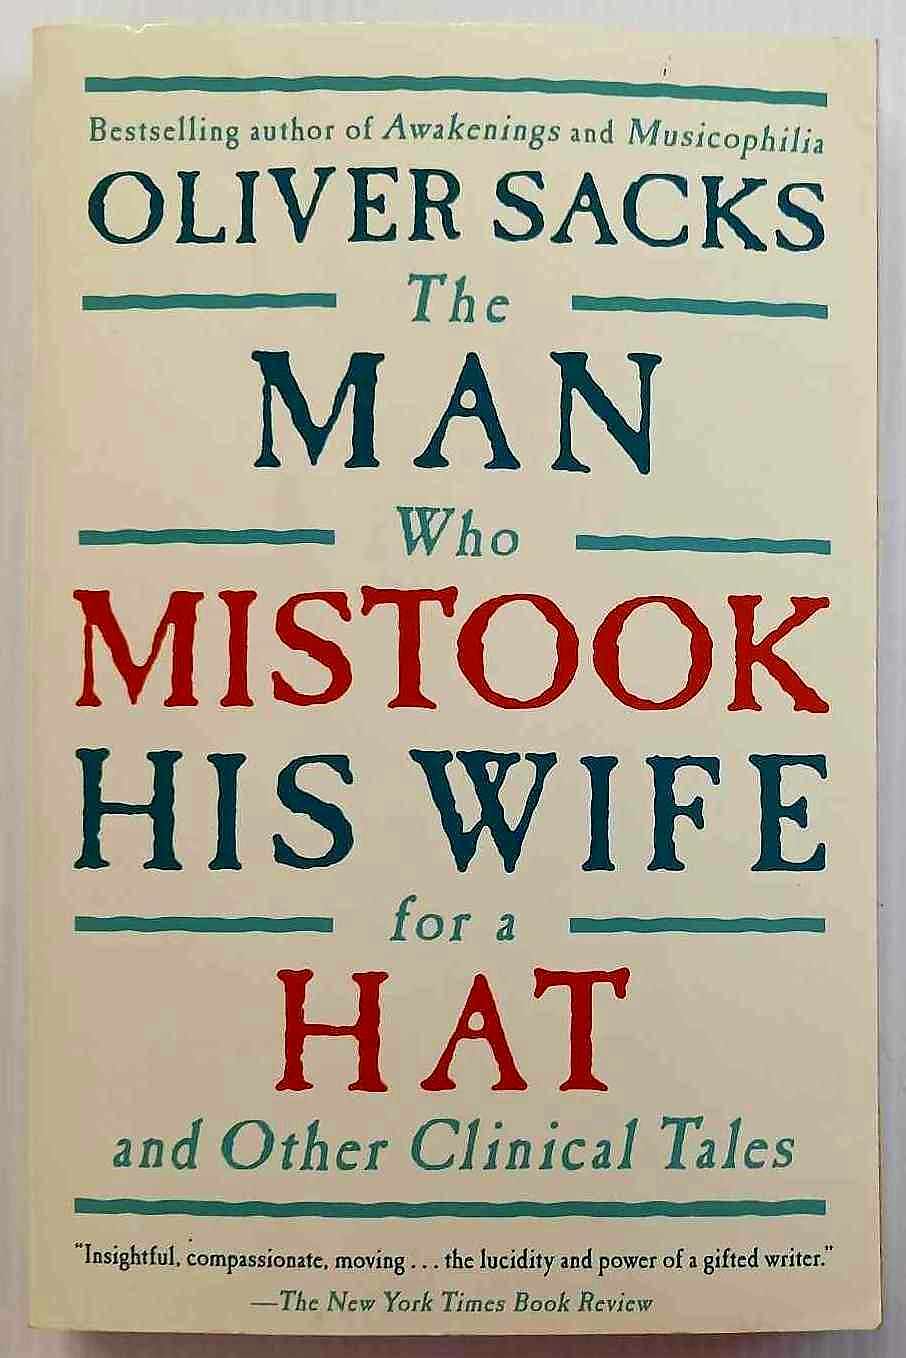 THE MAN WHO MISTOOK HIS WIFE FOR A HAT - Oliver Sacks